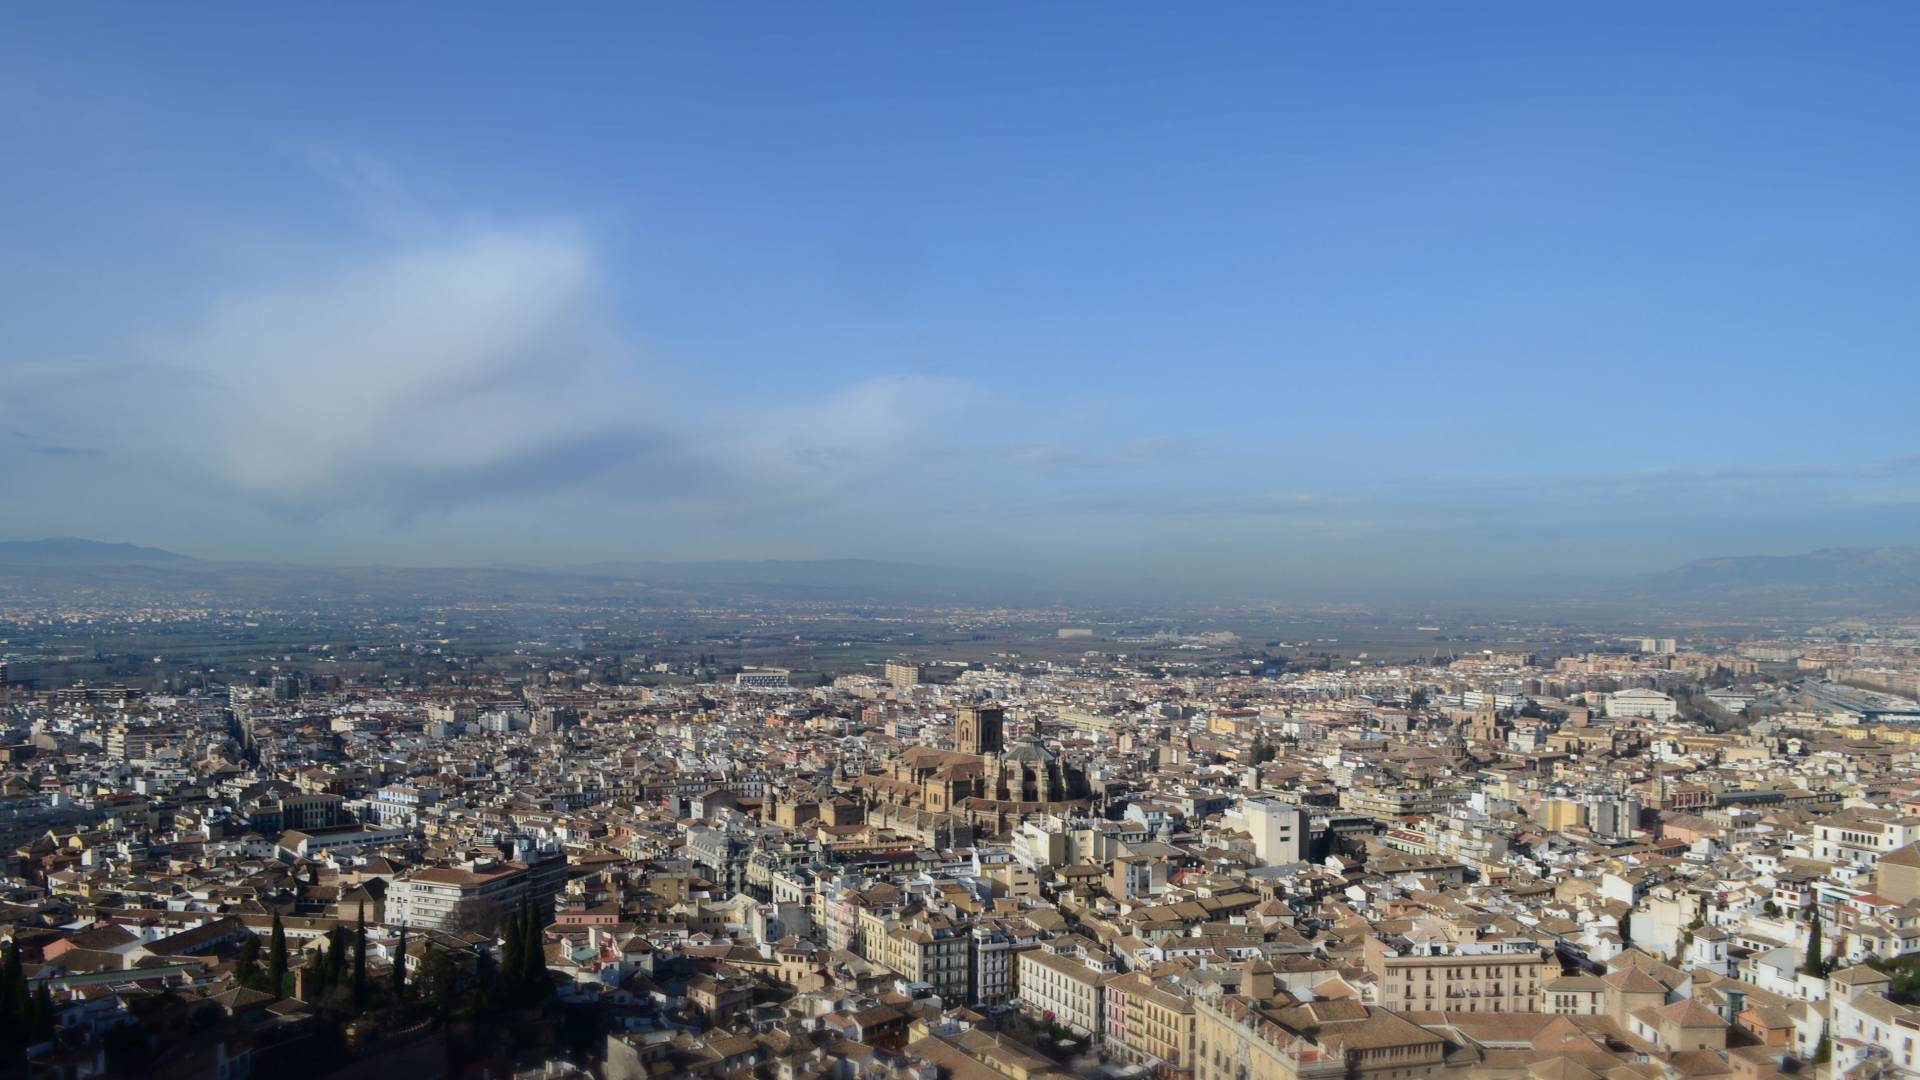 View from tallest tower of Granada’s Alhambra Palace